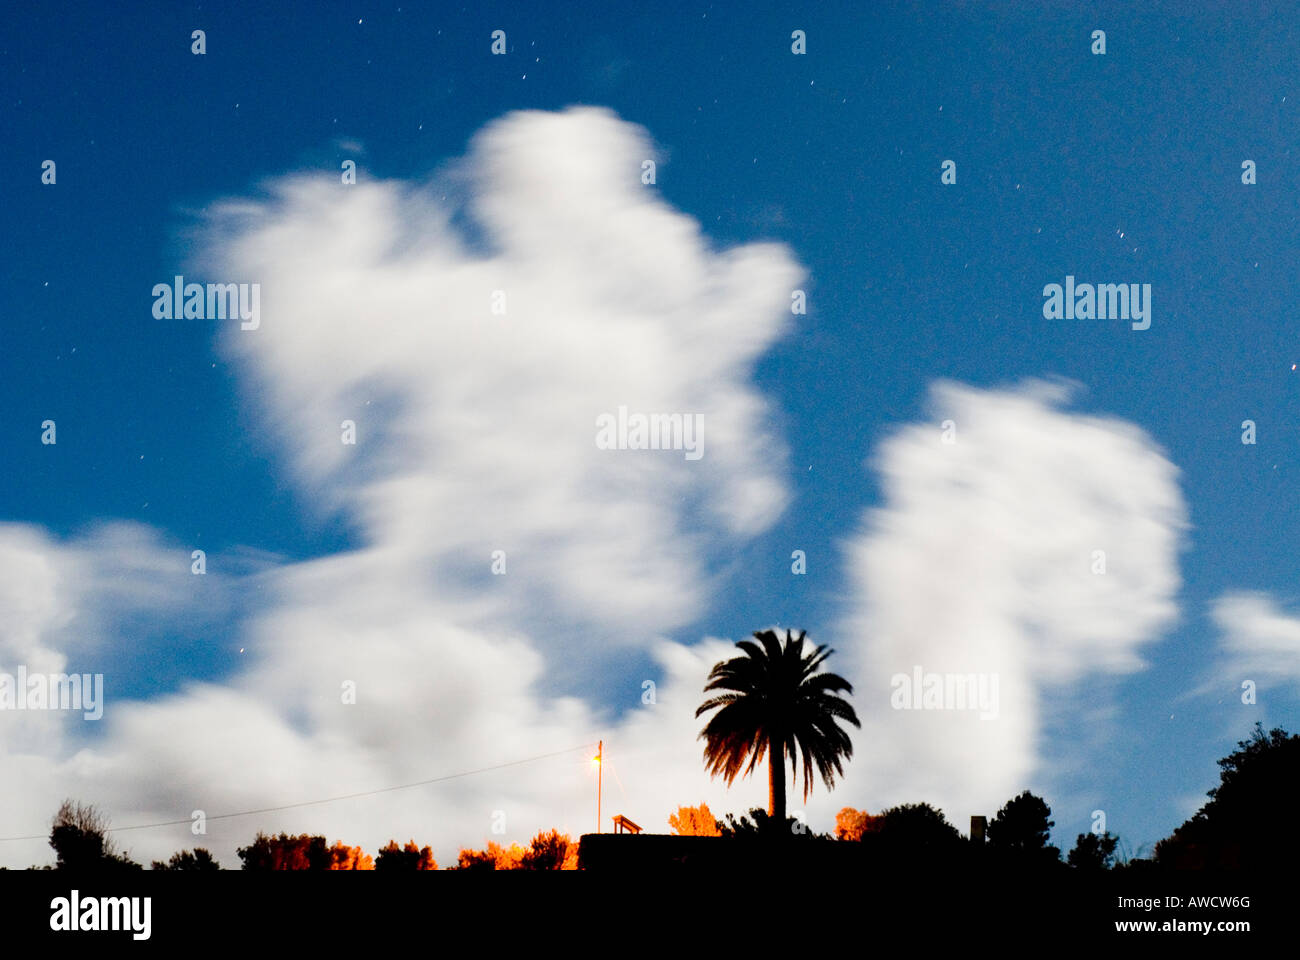 Spain Canary Islands La Palma La Tosca lookout drifting night clouds in moonshine and palm tree Stock Photo